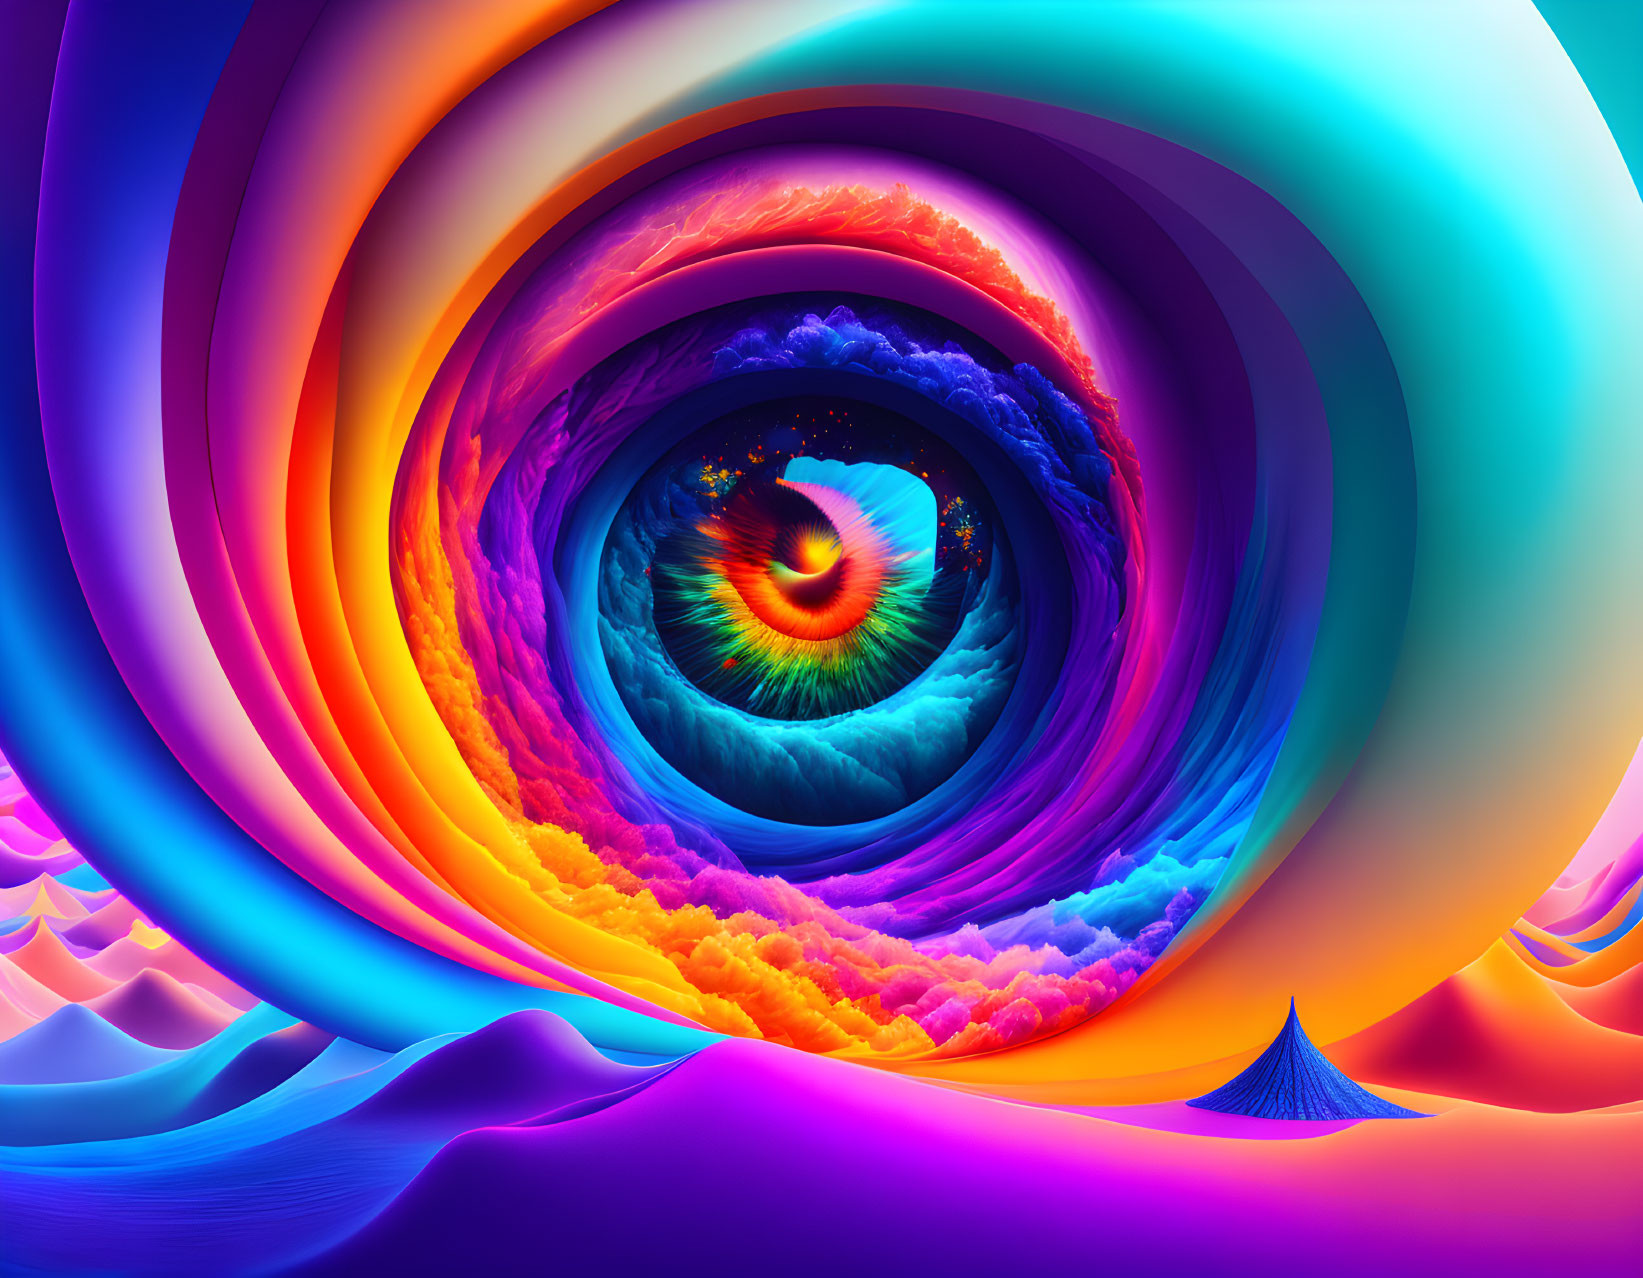 Colorful Abstract Swirl with Eye Pattern in Surreal Landscape